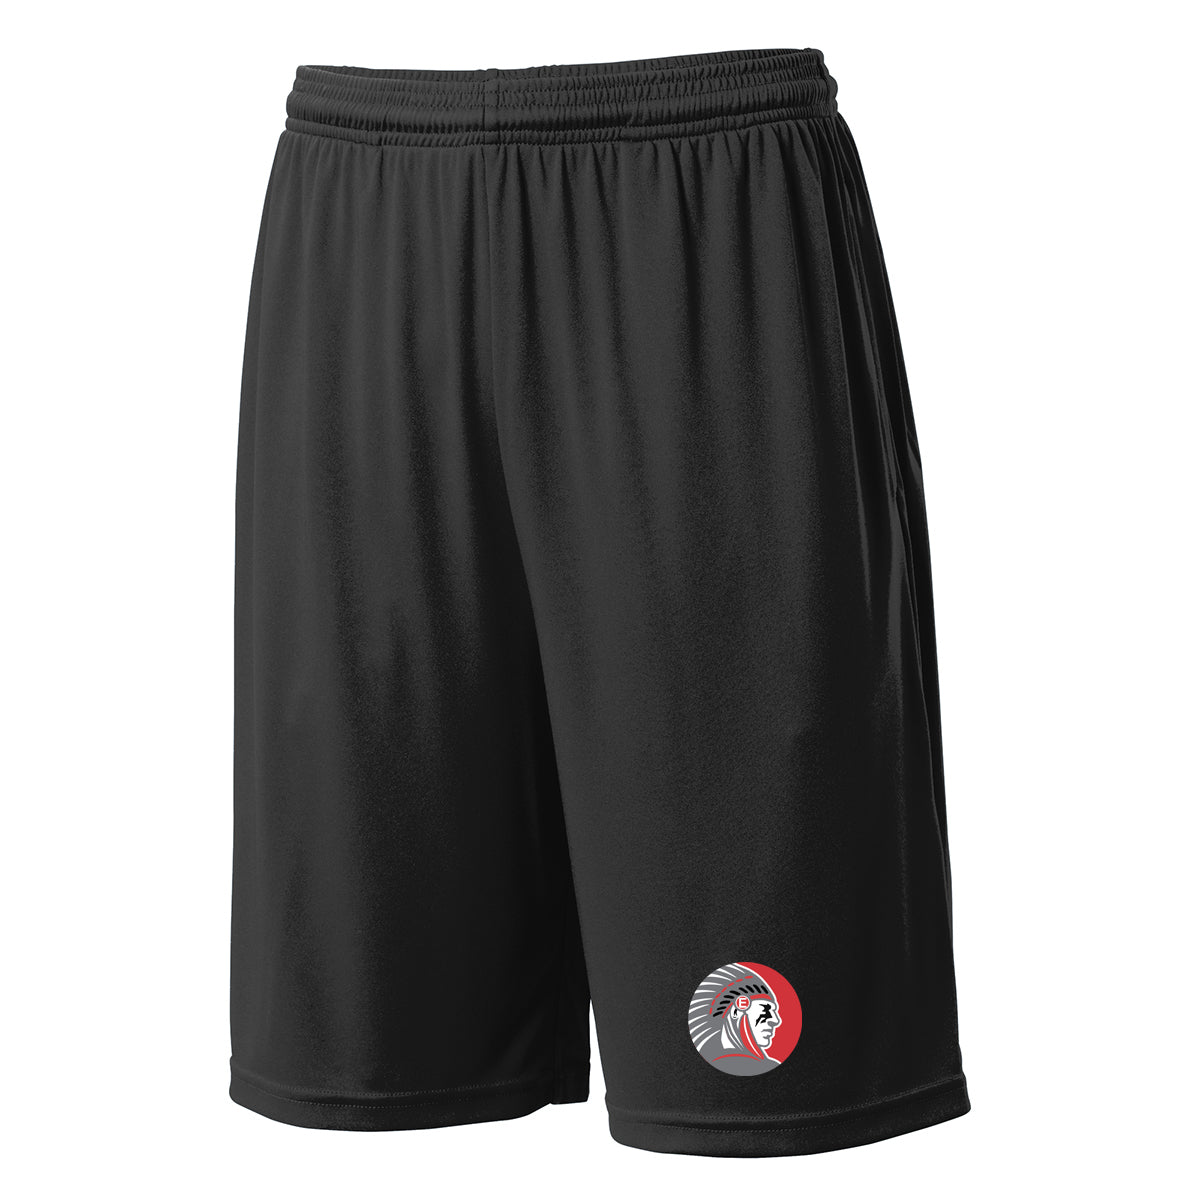 East Middle School Shorts